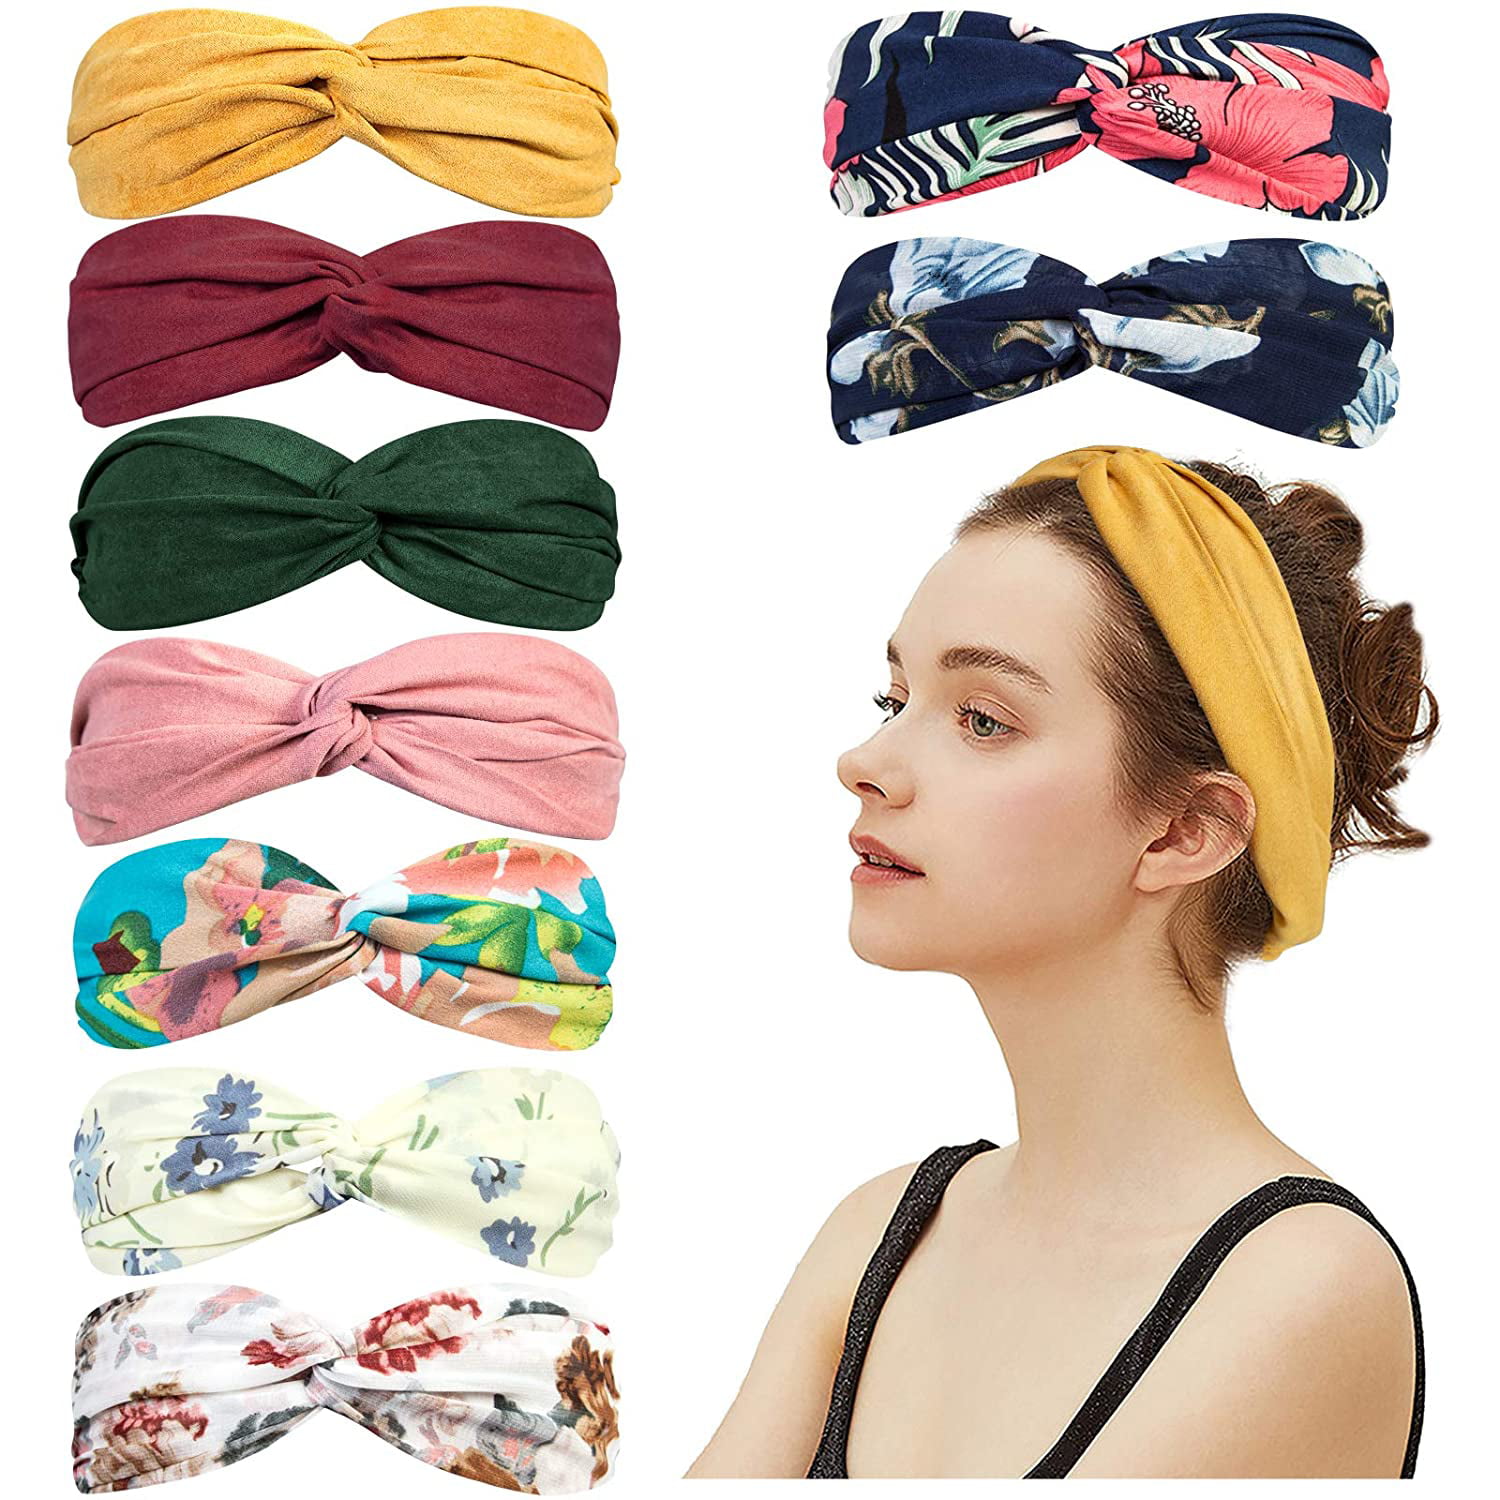 Vintage Style Top Knot Headband Turban Women Knotted Elastic Hair Bands For Girls Head Hoop Hairband Hair Accessories,style 3 white flower 